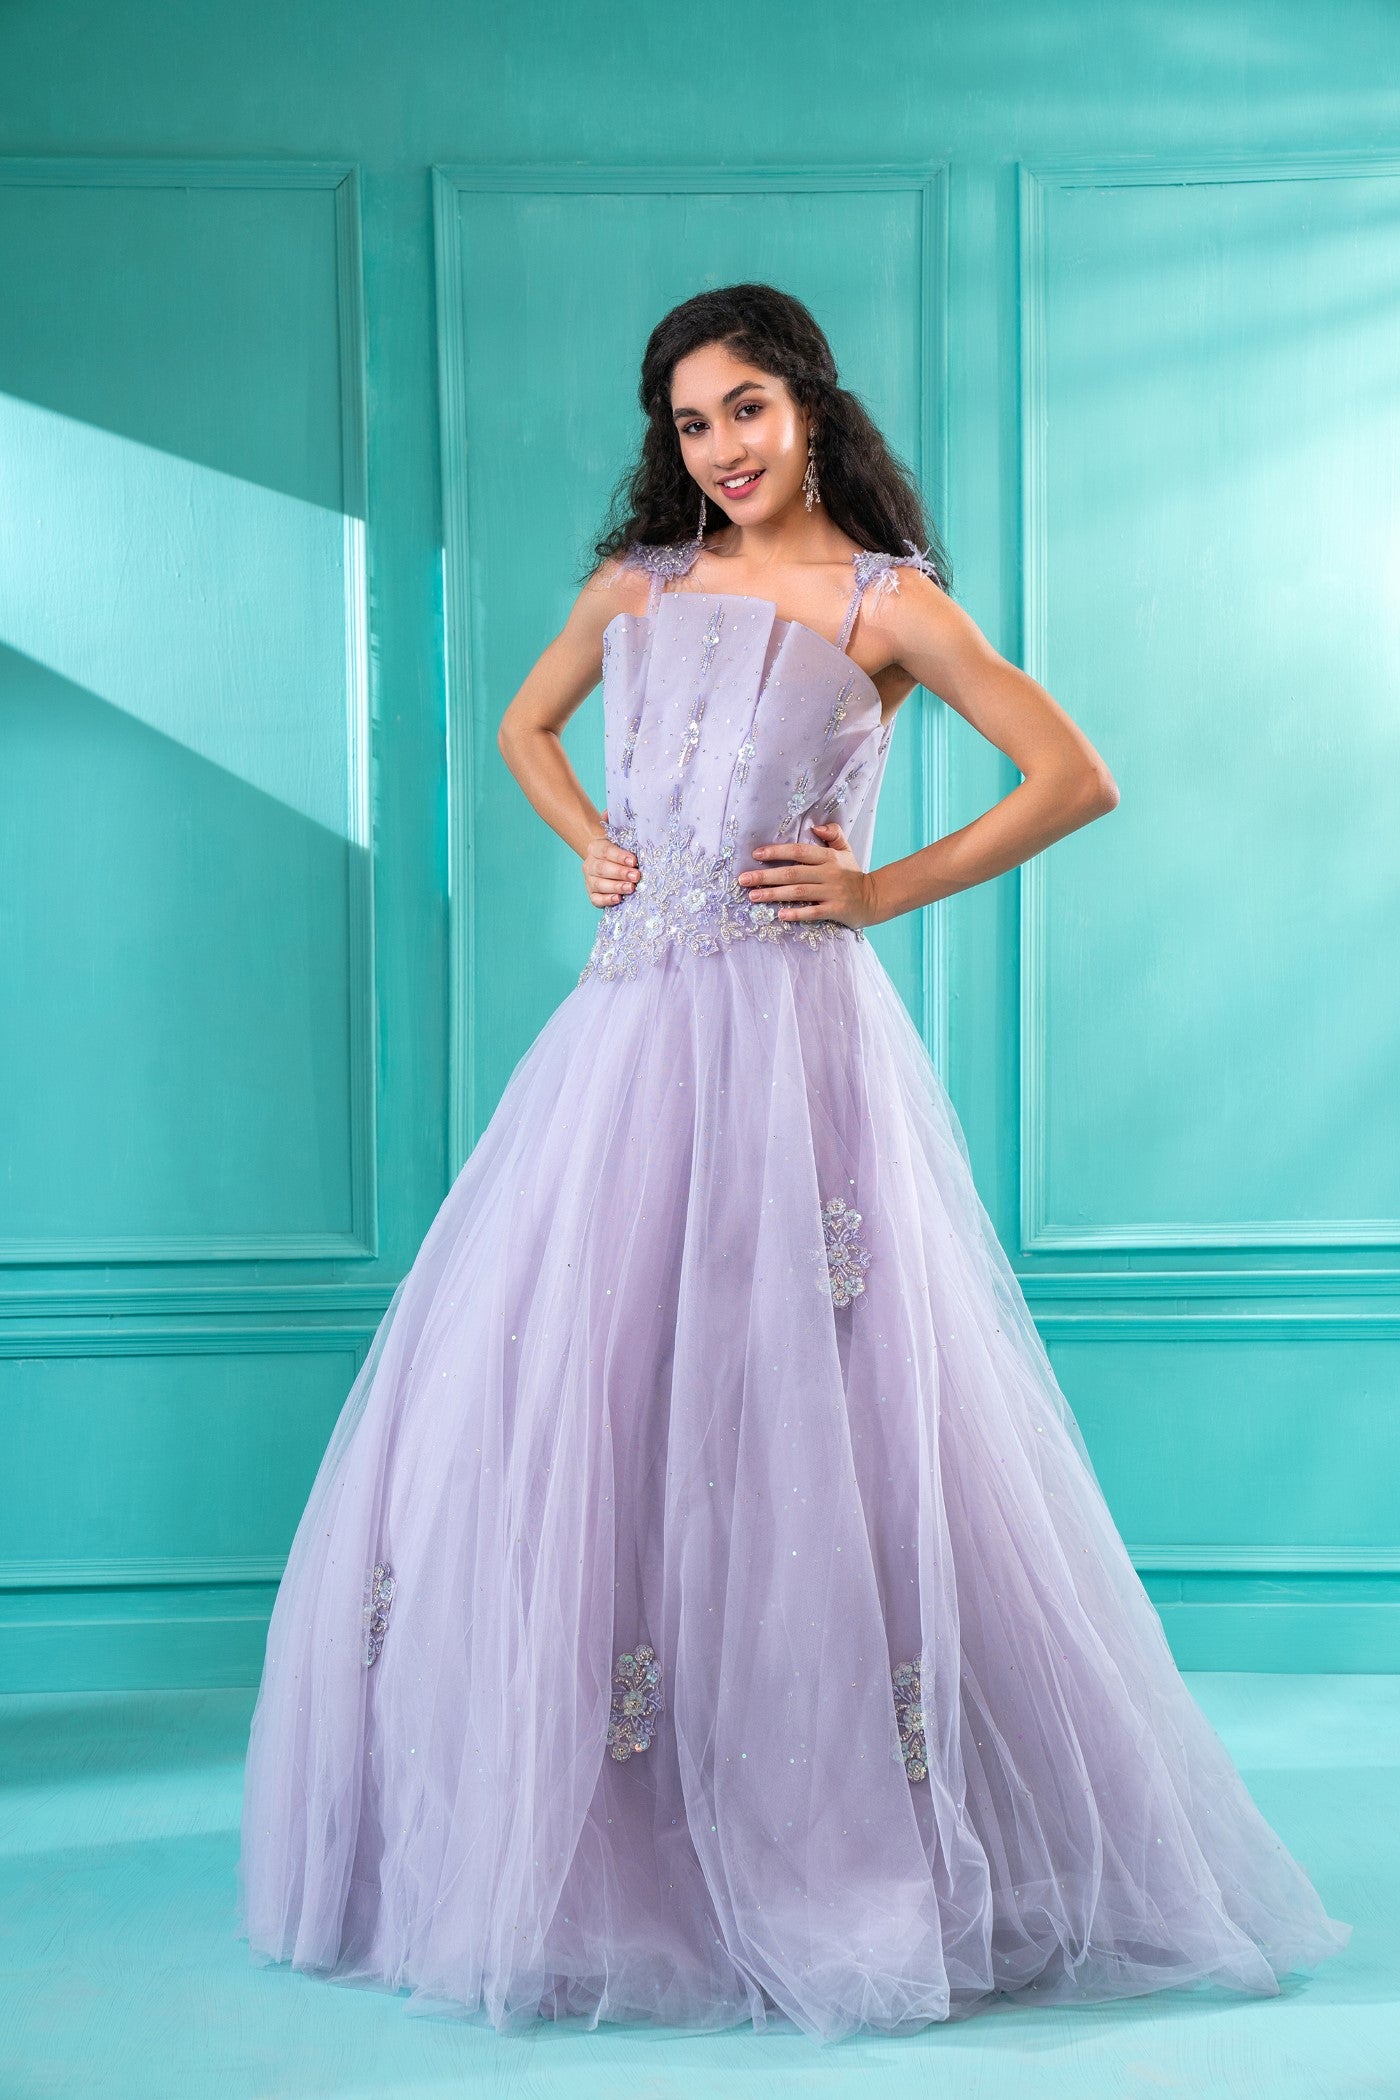 Off Shoulder Lavender Ball Gown Sweet 16 Purple Wedding Dress With Ruffled  Lace, Beaded Applique, And Quinceanera Inspired Design Perfect For Prom,  Graduation, Or Festivals From Lovemydress, $85.9 | DHgate.Com